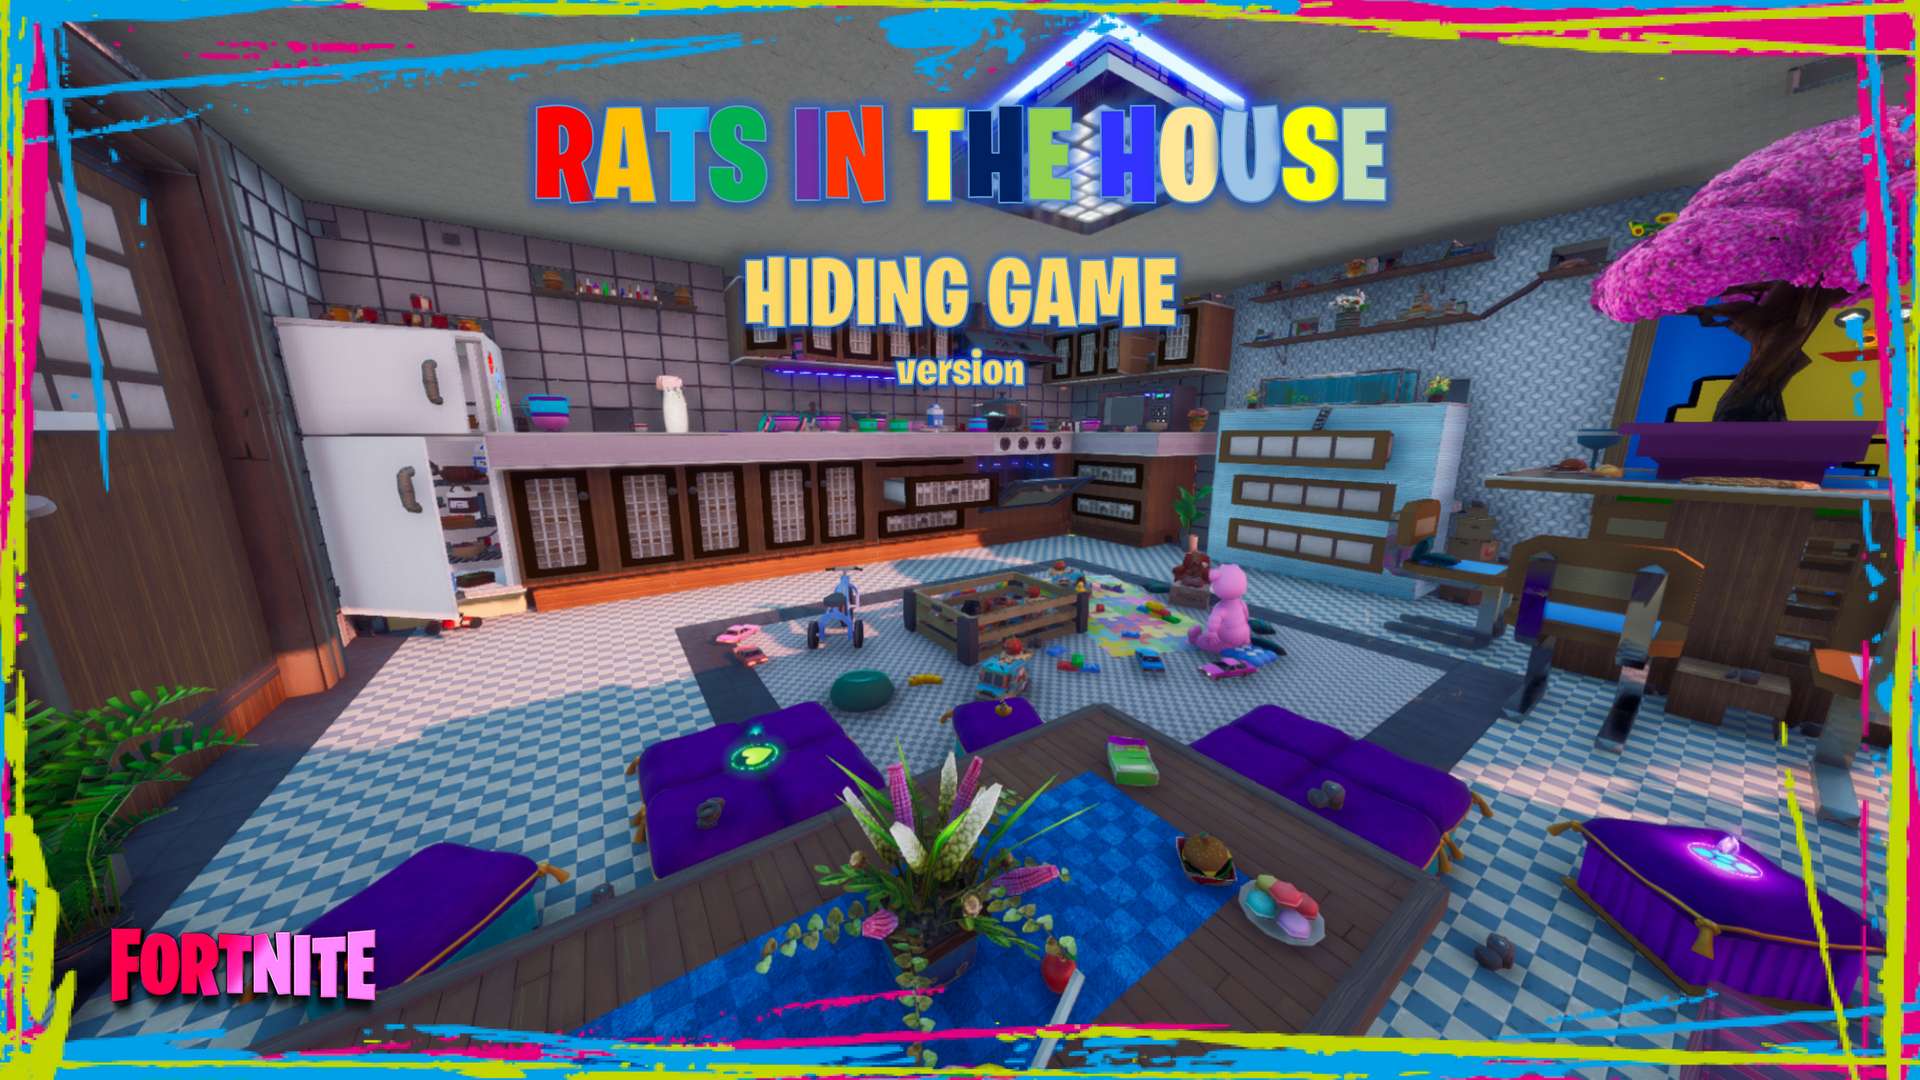 RATS IN THE HOUSE (HIDING GAME)